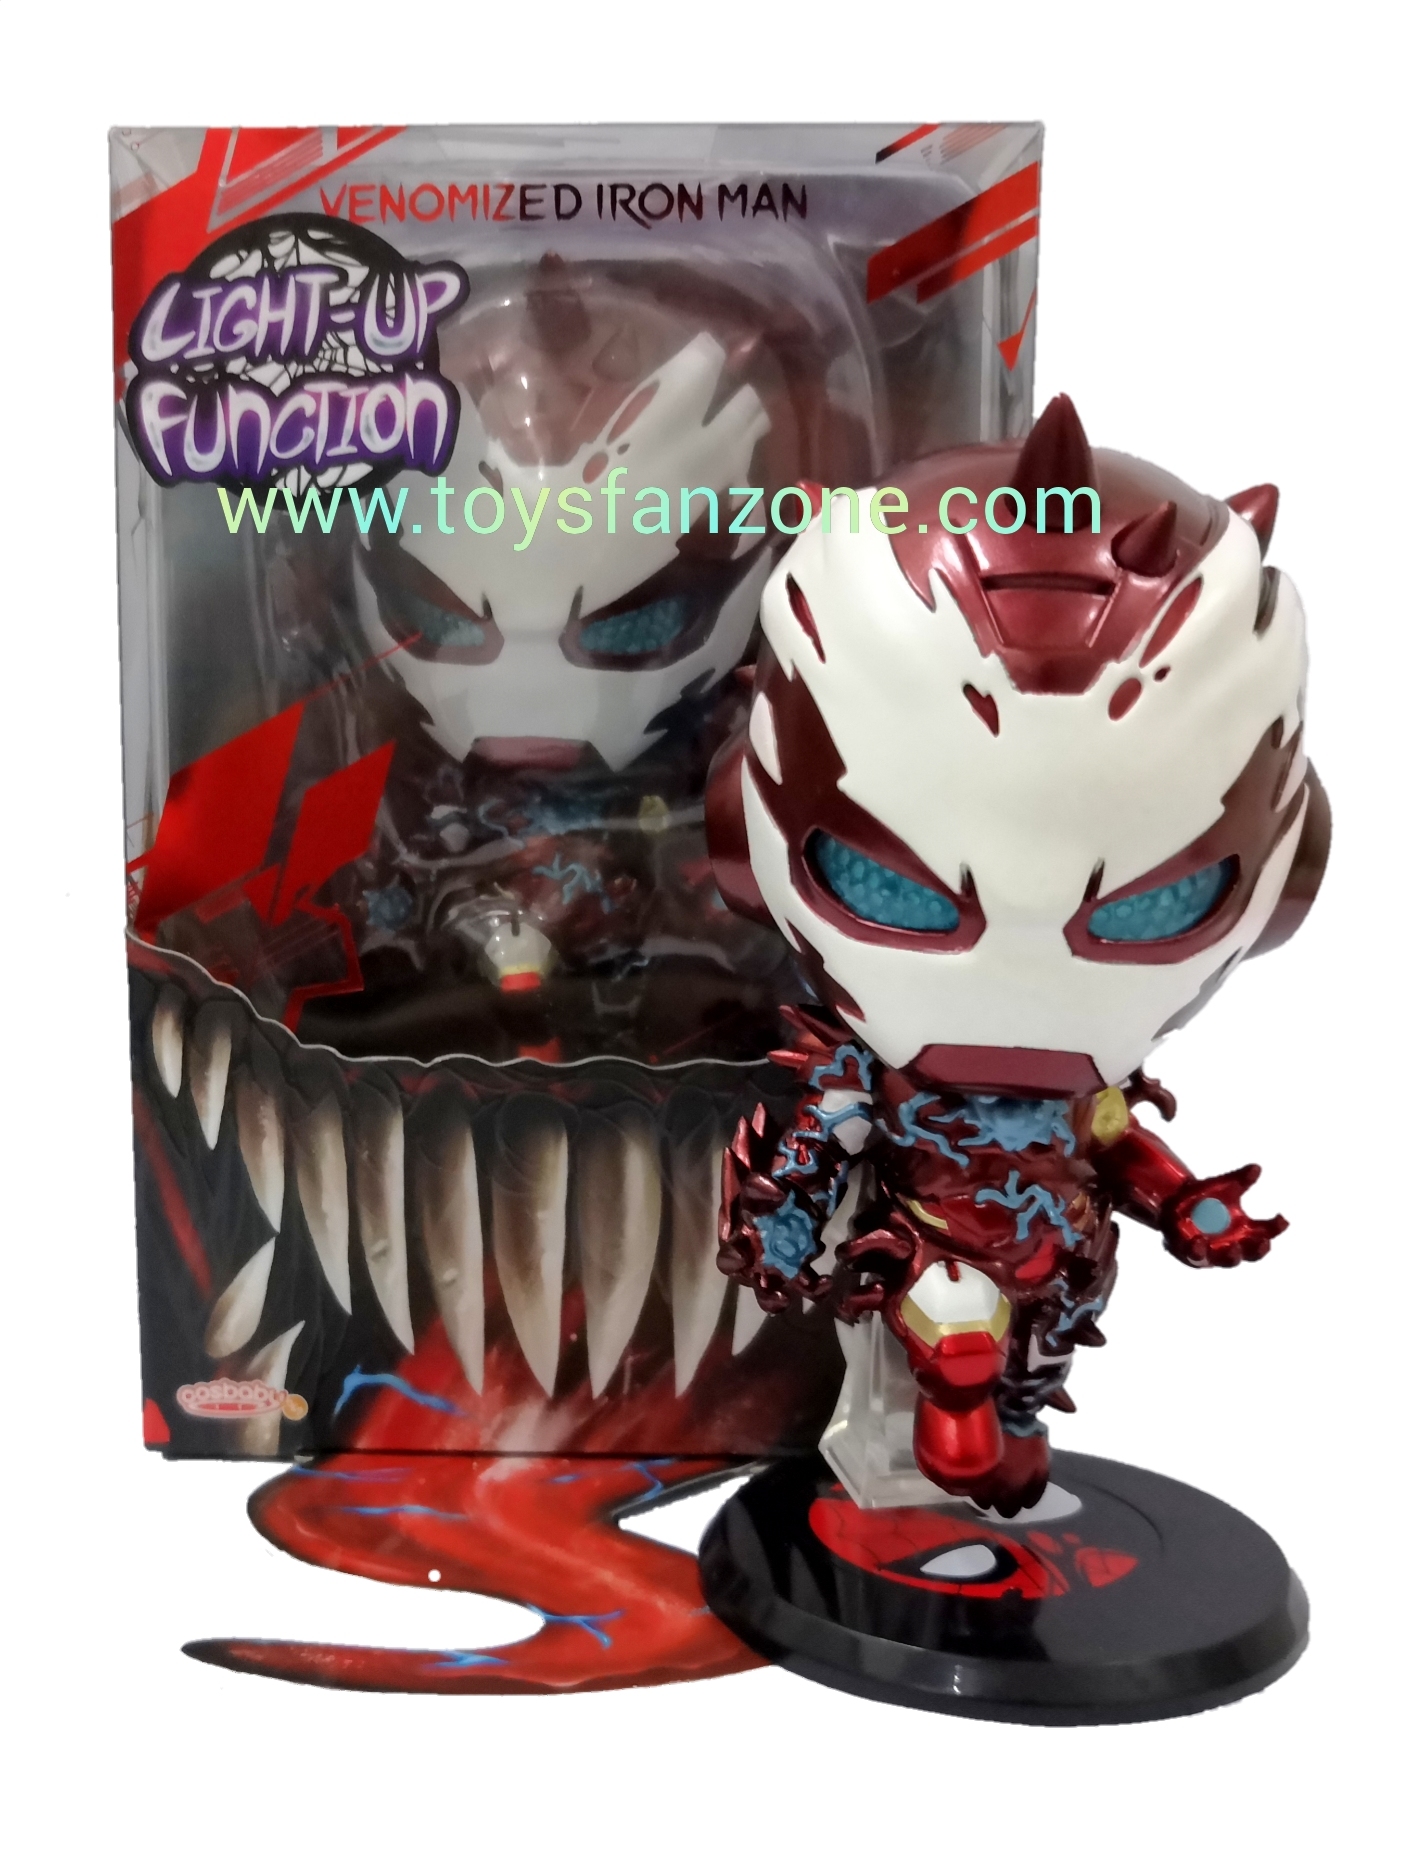 Marvel Hot Toys COSB763 Venomized Iron Man Cosbaby In Stock Light Up 